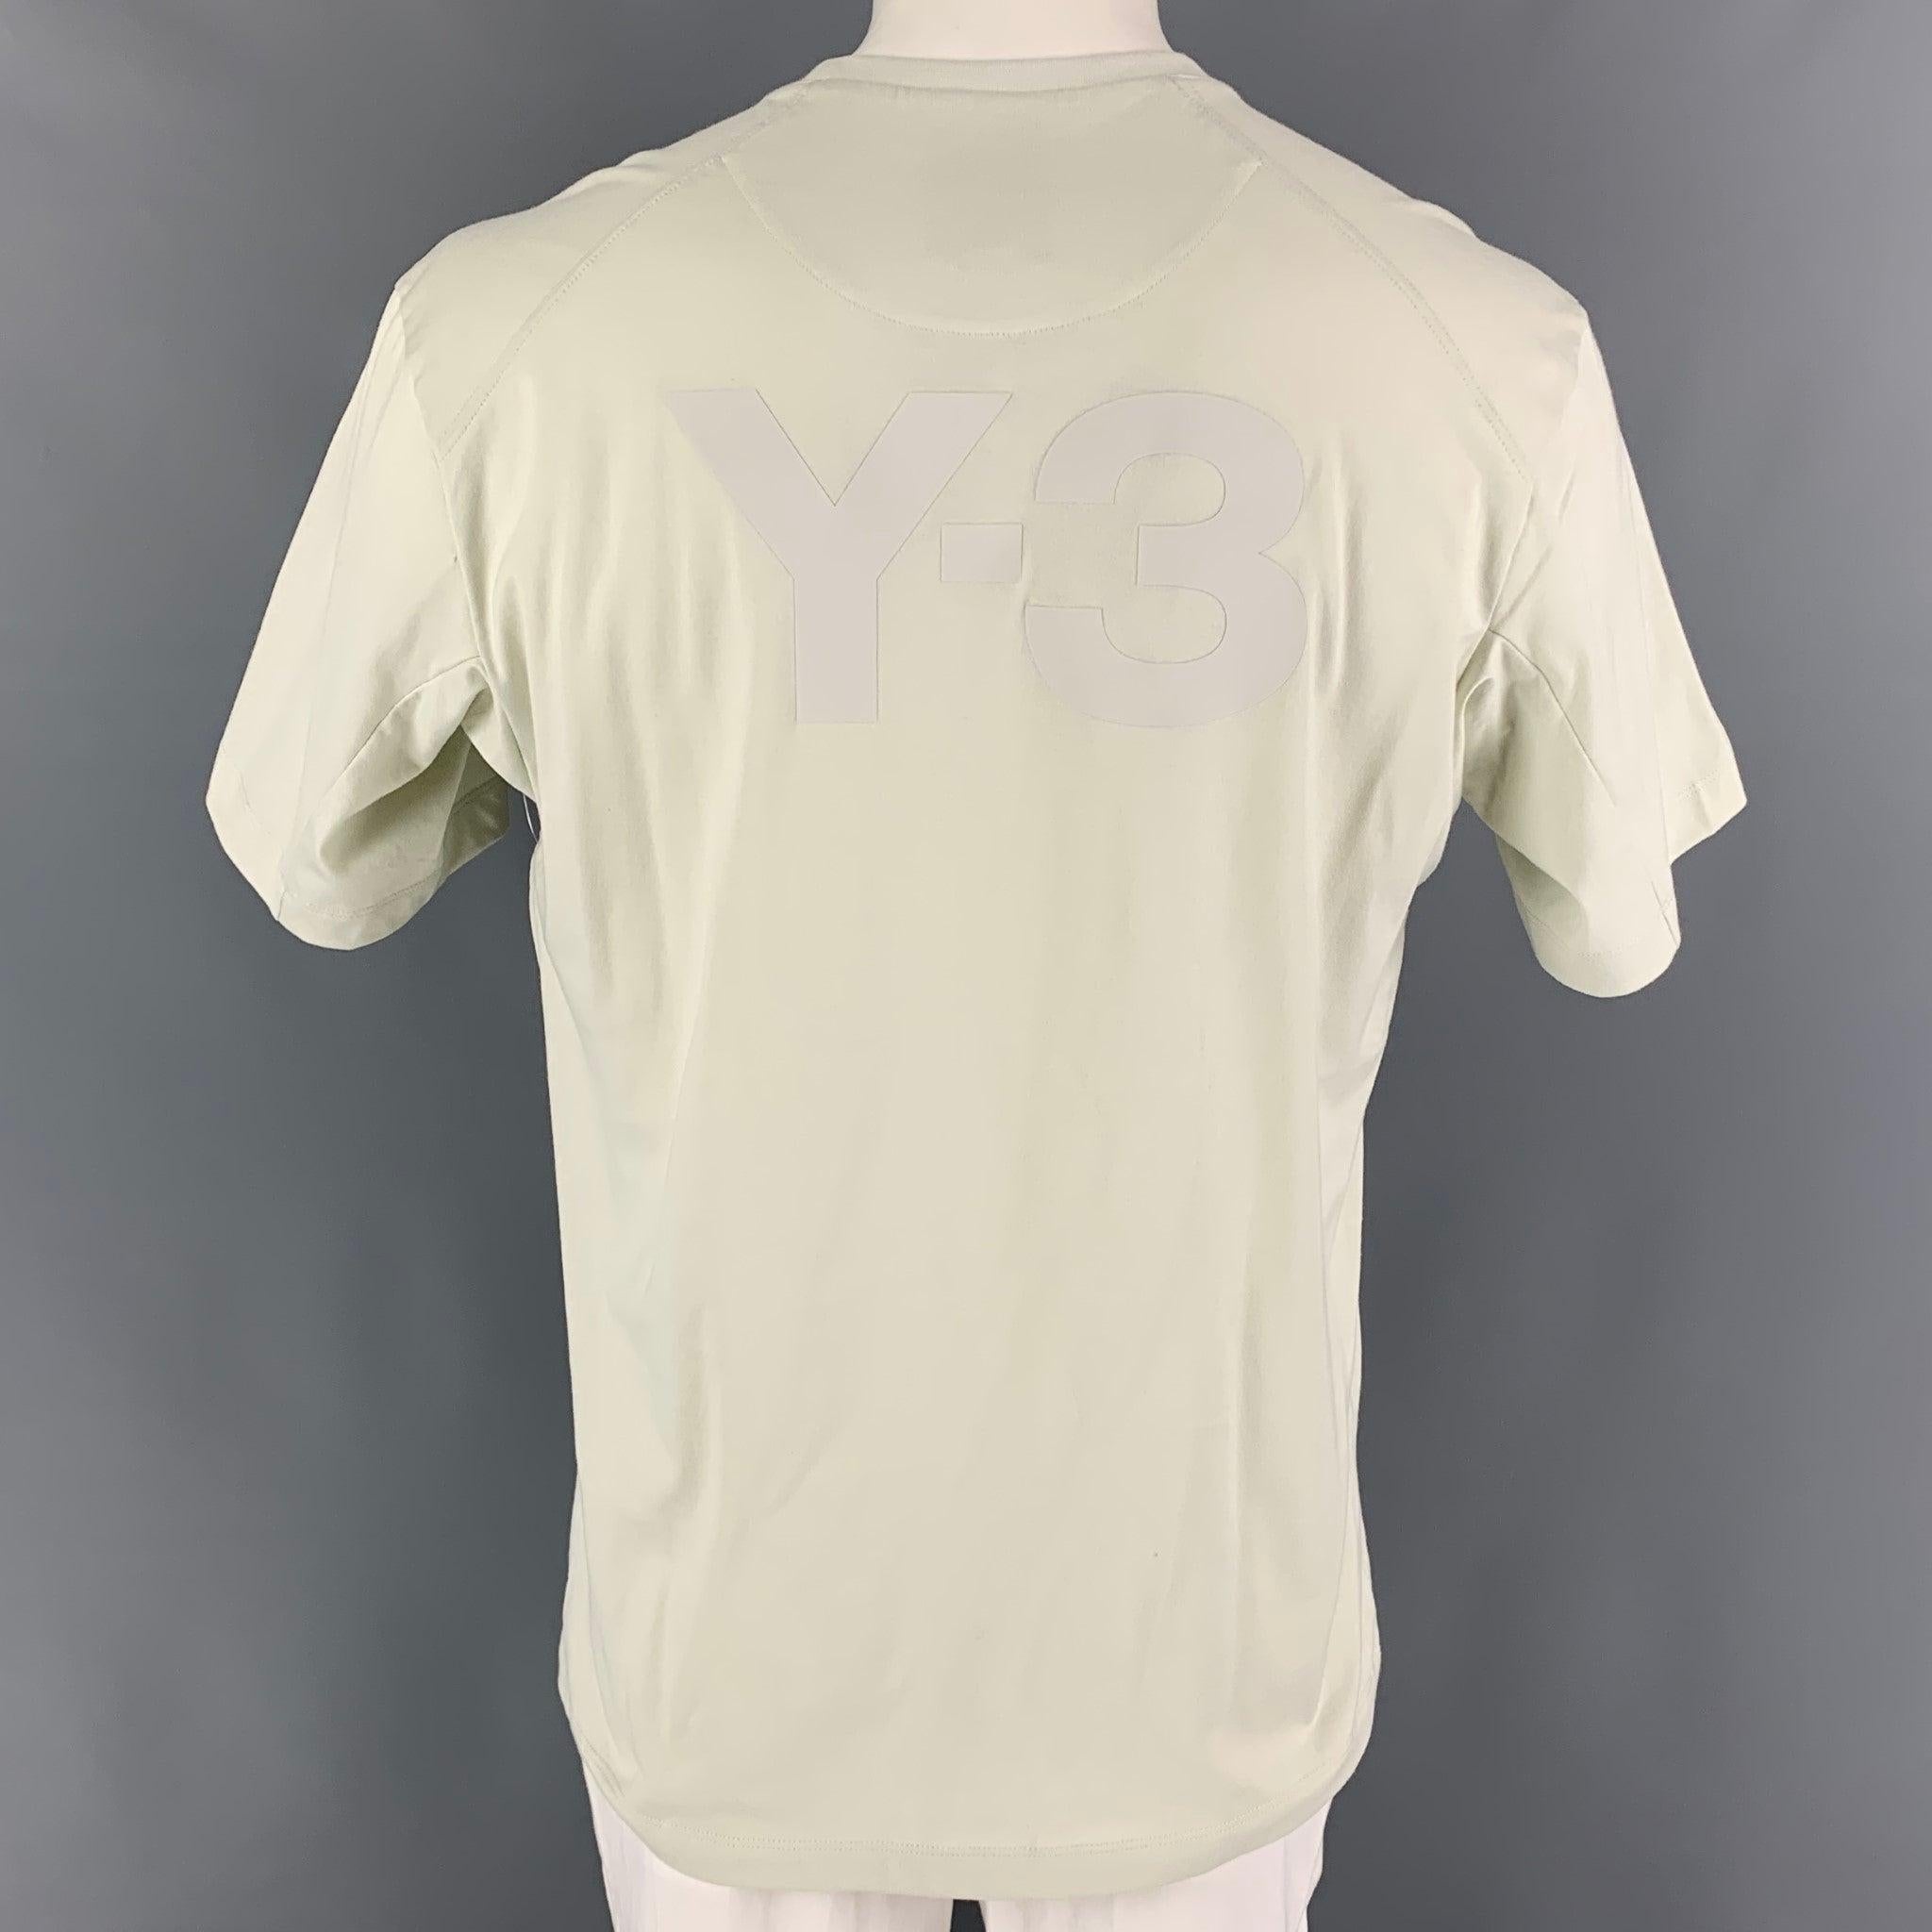 Y-3 t-shirt comes in a natural cotton featuring a back logo design and a crew-neck.
Very Good
Pre-Owned Condition. 

Marked:   L  

Measurements: 
 
Shoulder: 20 inches Chest: 42 inches Sleeve: 10 inches Length: 29 inches 
  
  
 
Reference: